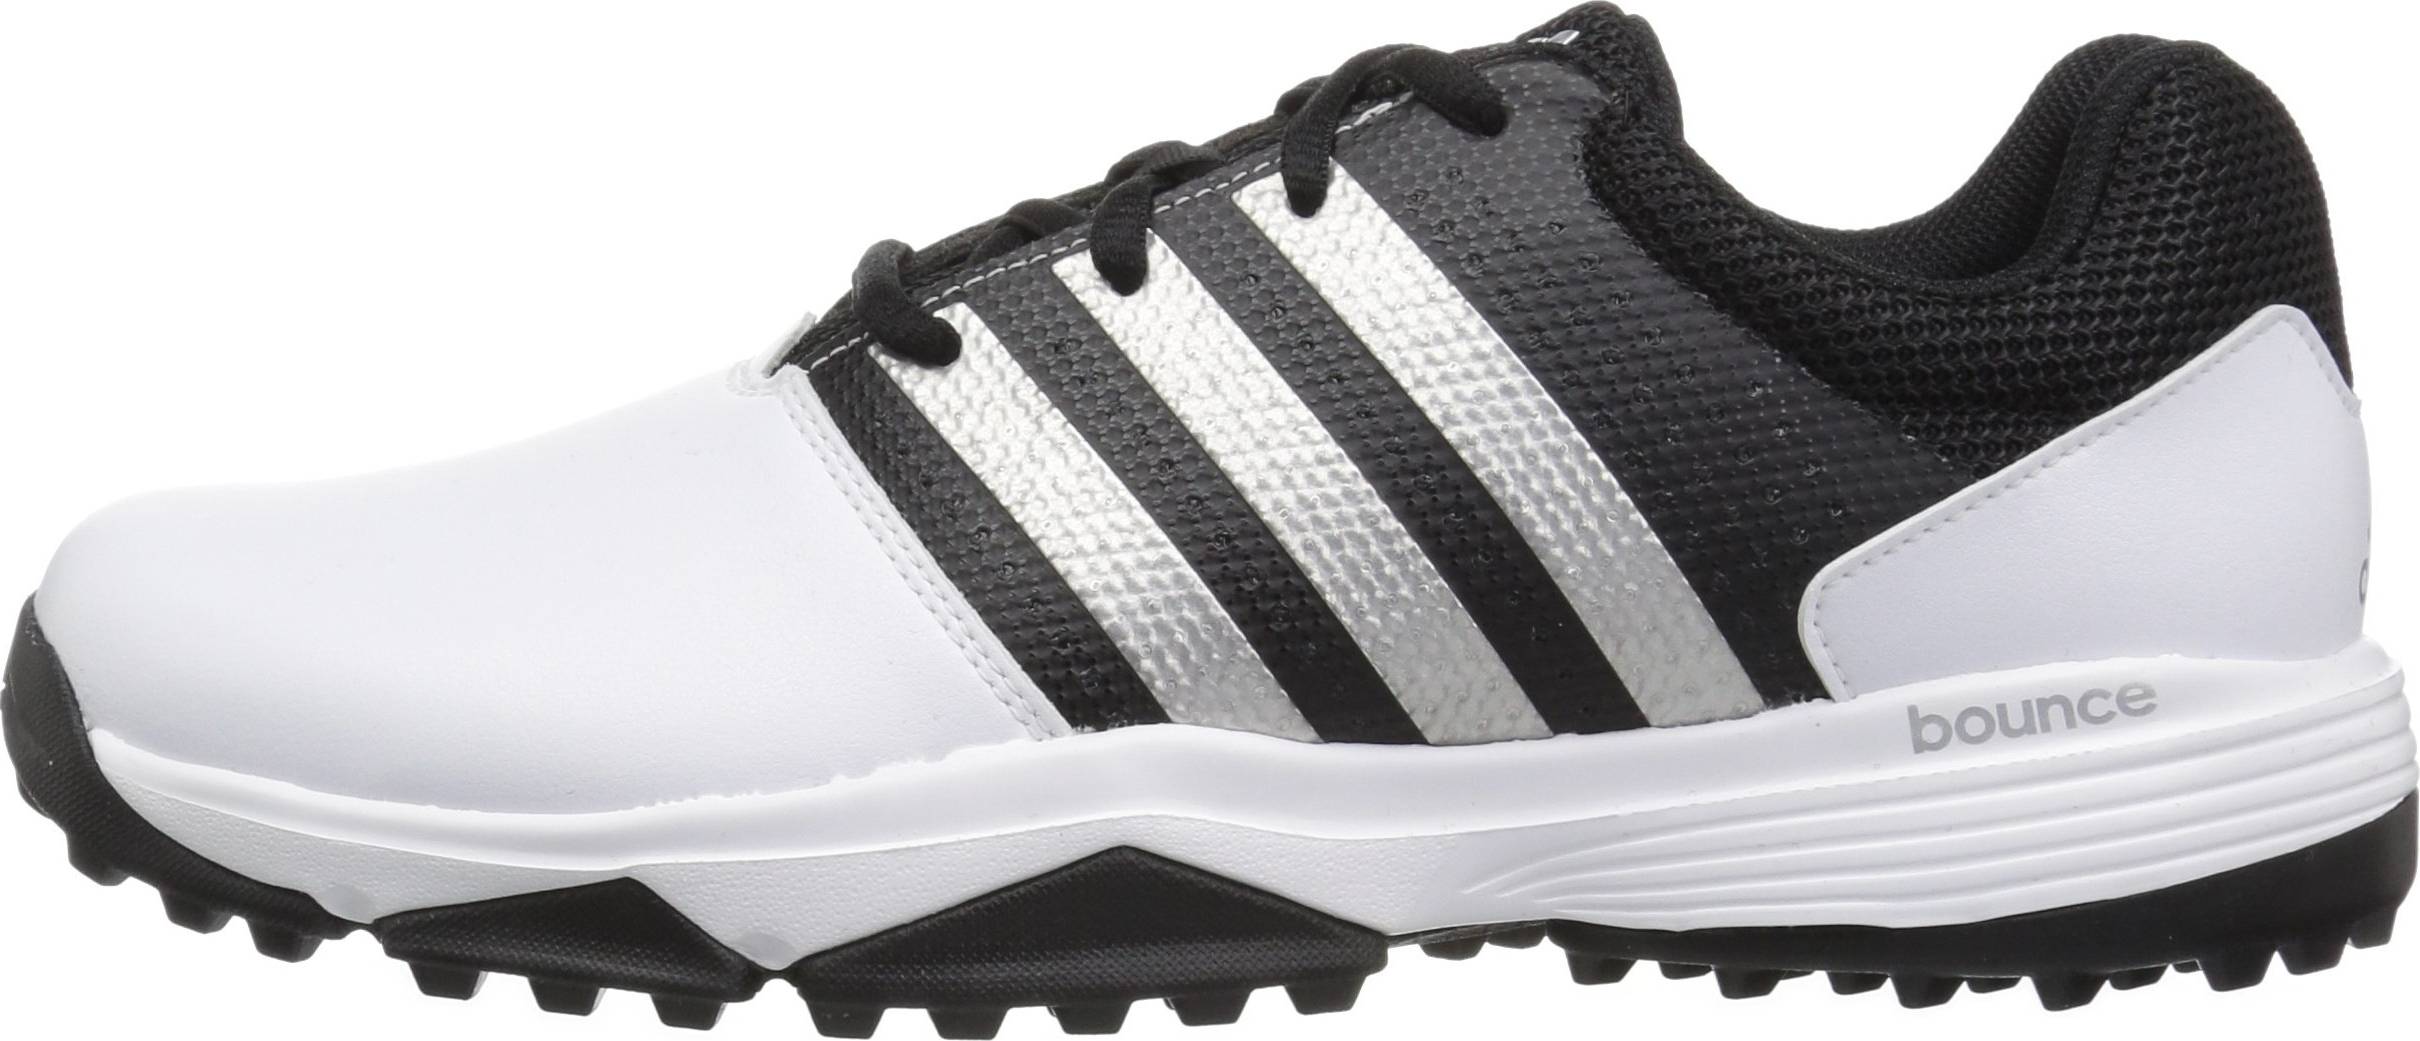 adidas 360 traxion bounce spikeless golf shoes